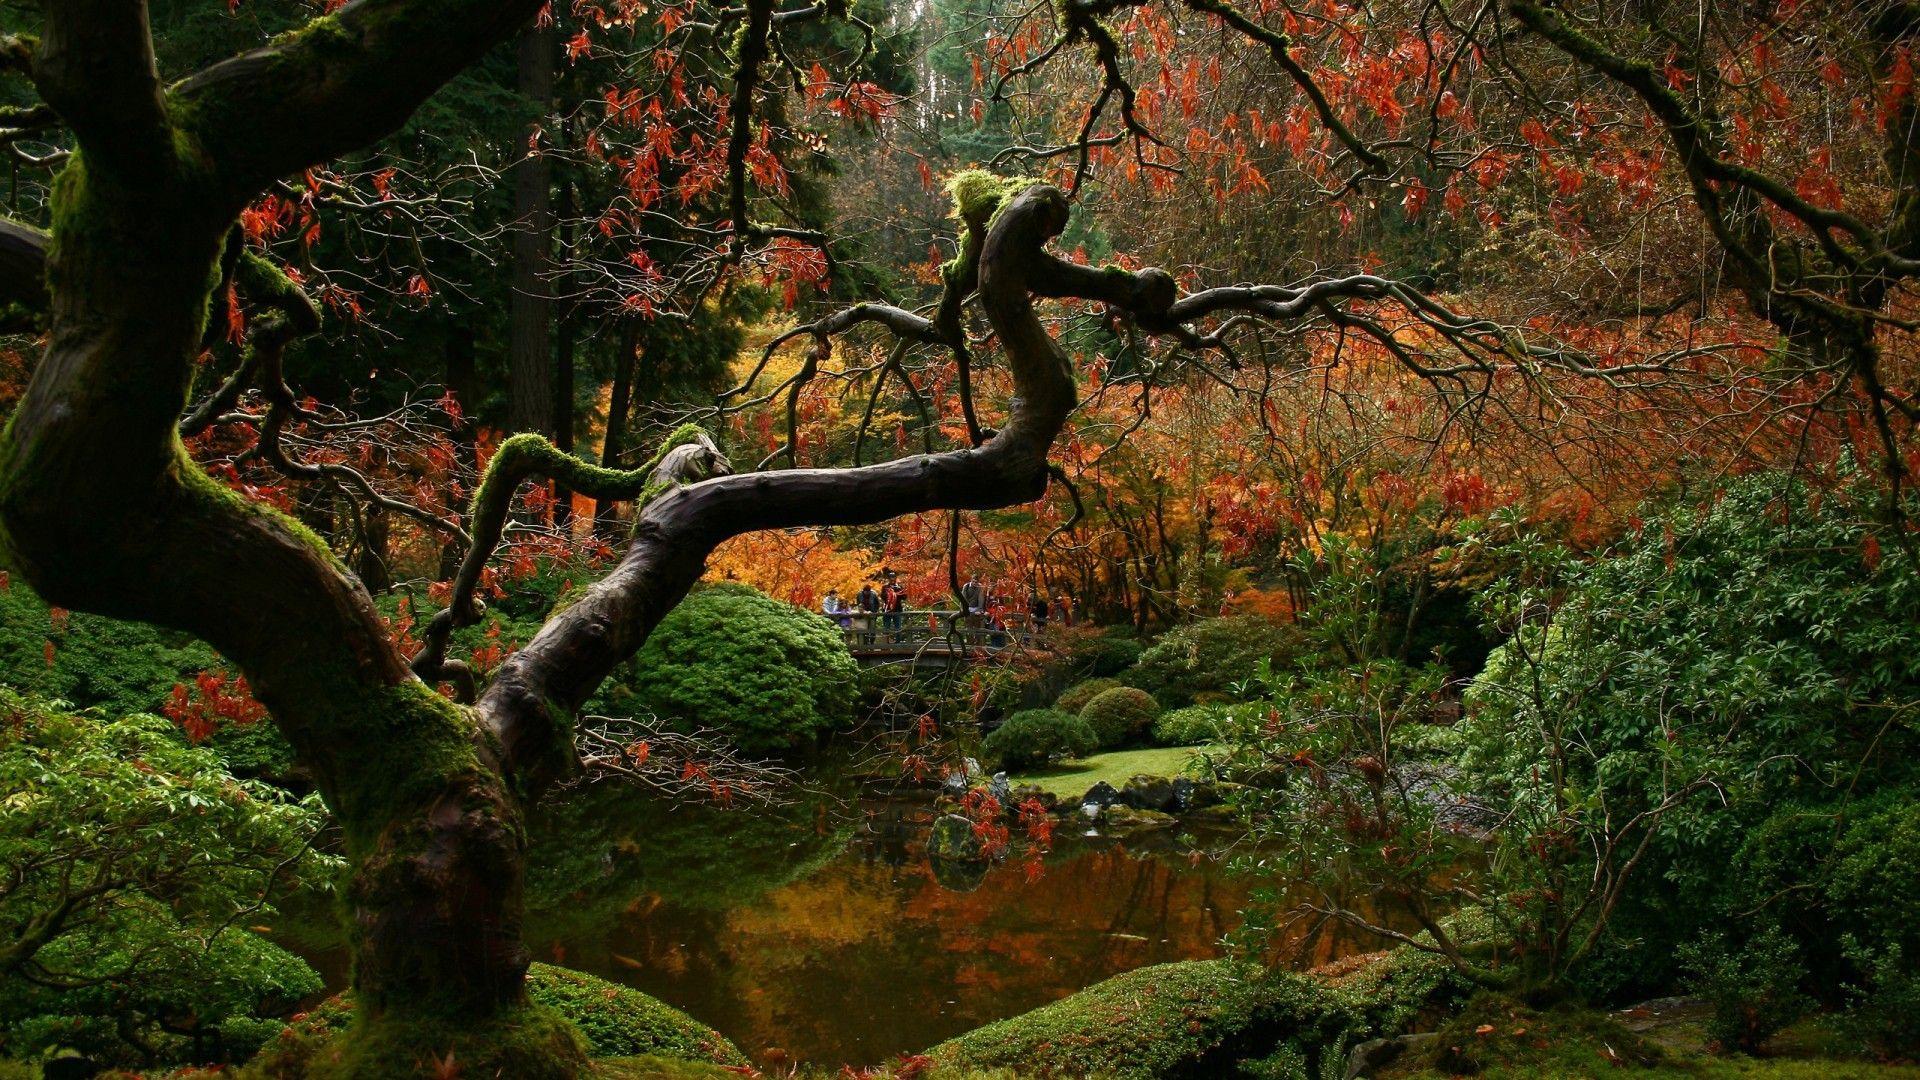 Dead tree in the Japanese garden wallpaper and image